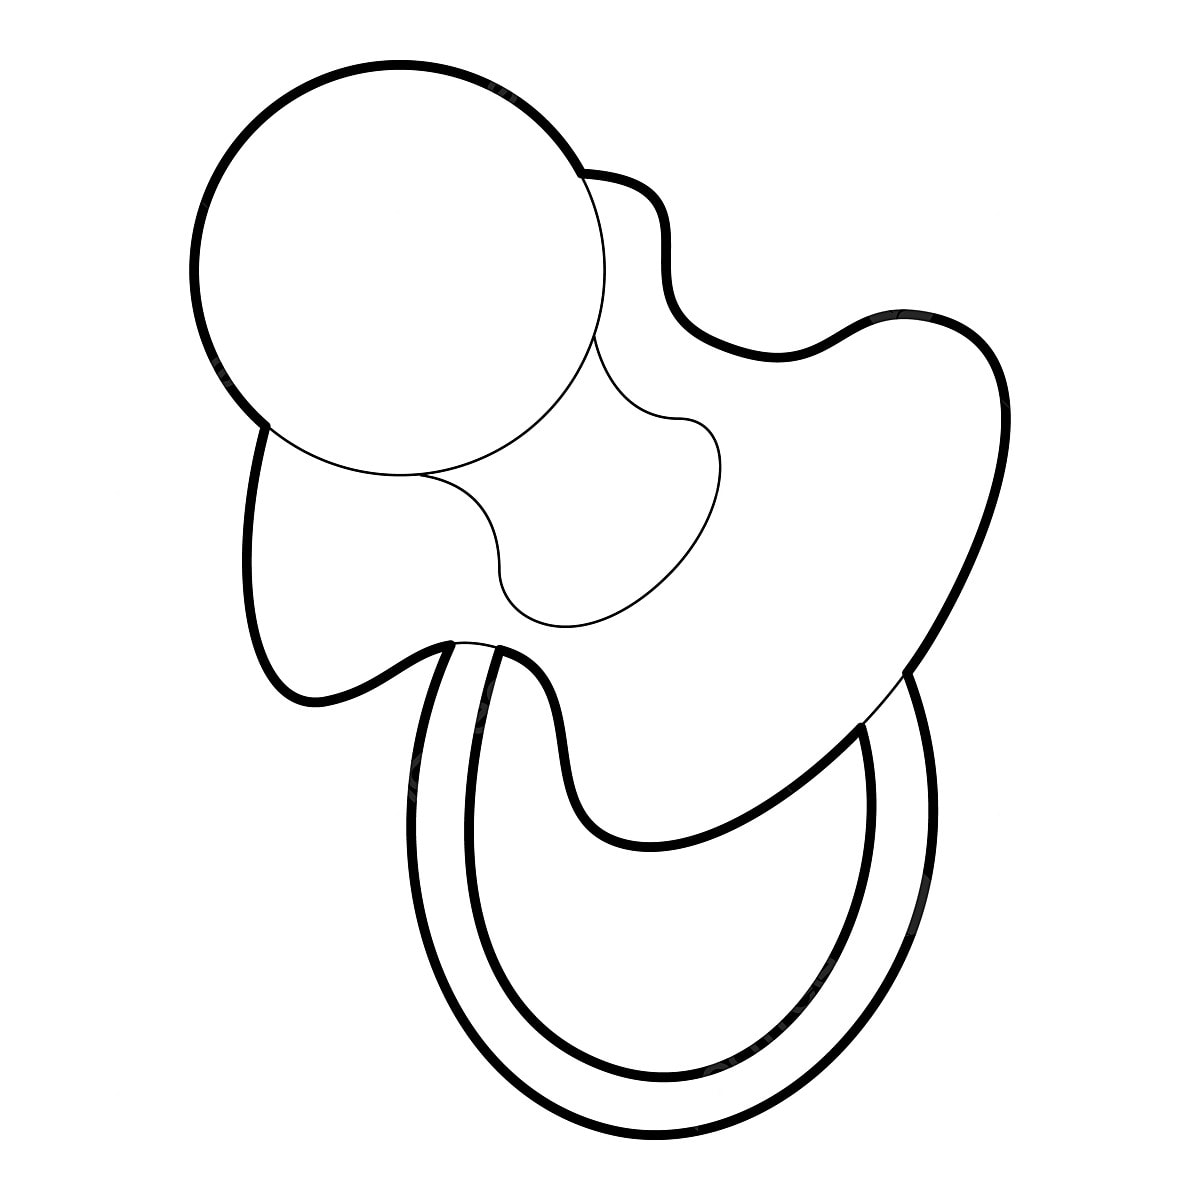 Baby pacifier icon isometric d style baby drawing pacifier drawing baby sketch png and vector with transparent background for free download